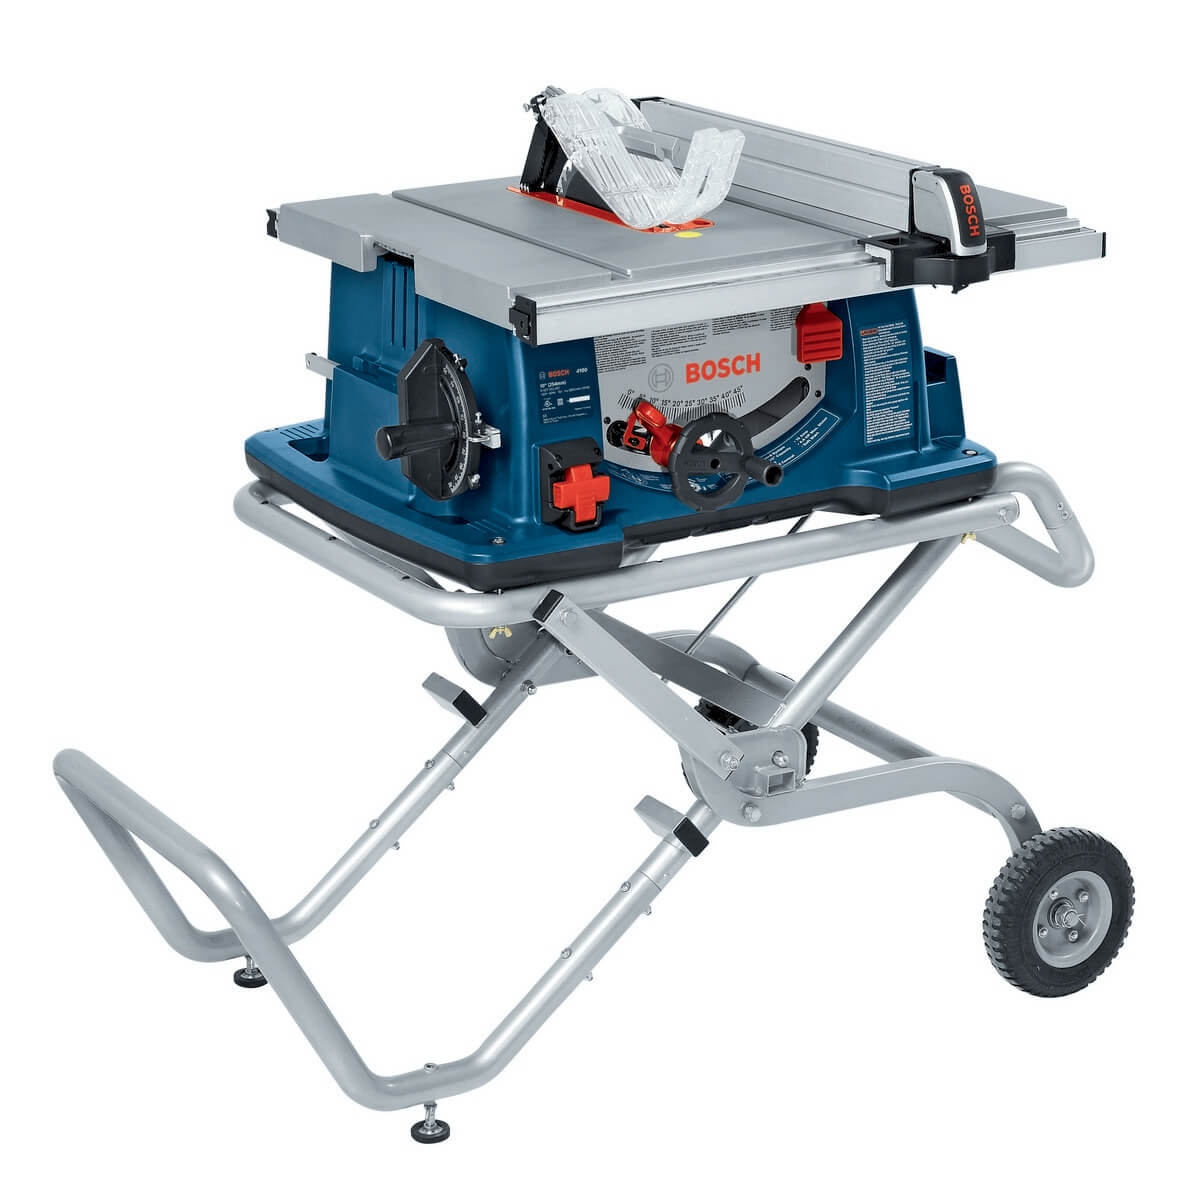 BOSCH, Bosch 4100-09 10-Inch Worksite Table Saw with Gravity-Rise Stand